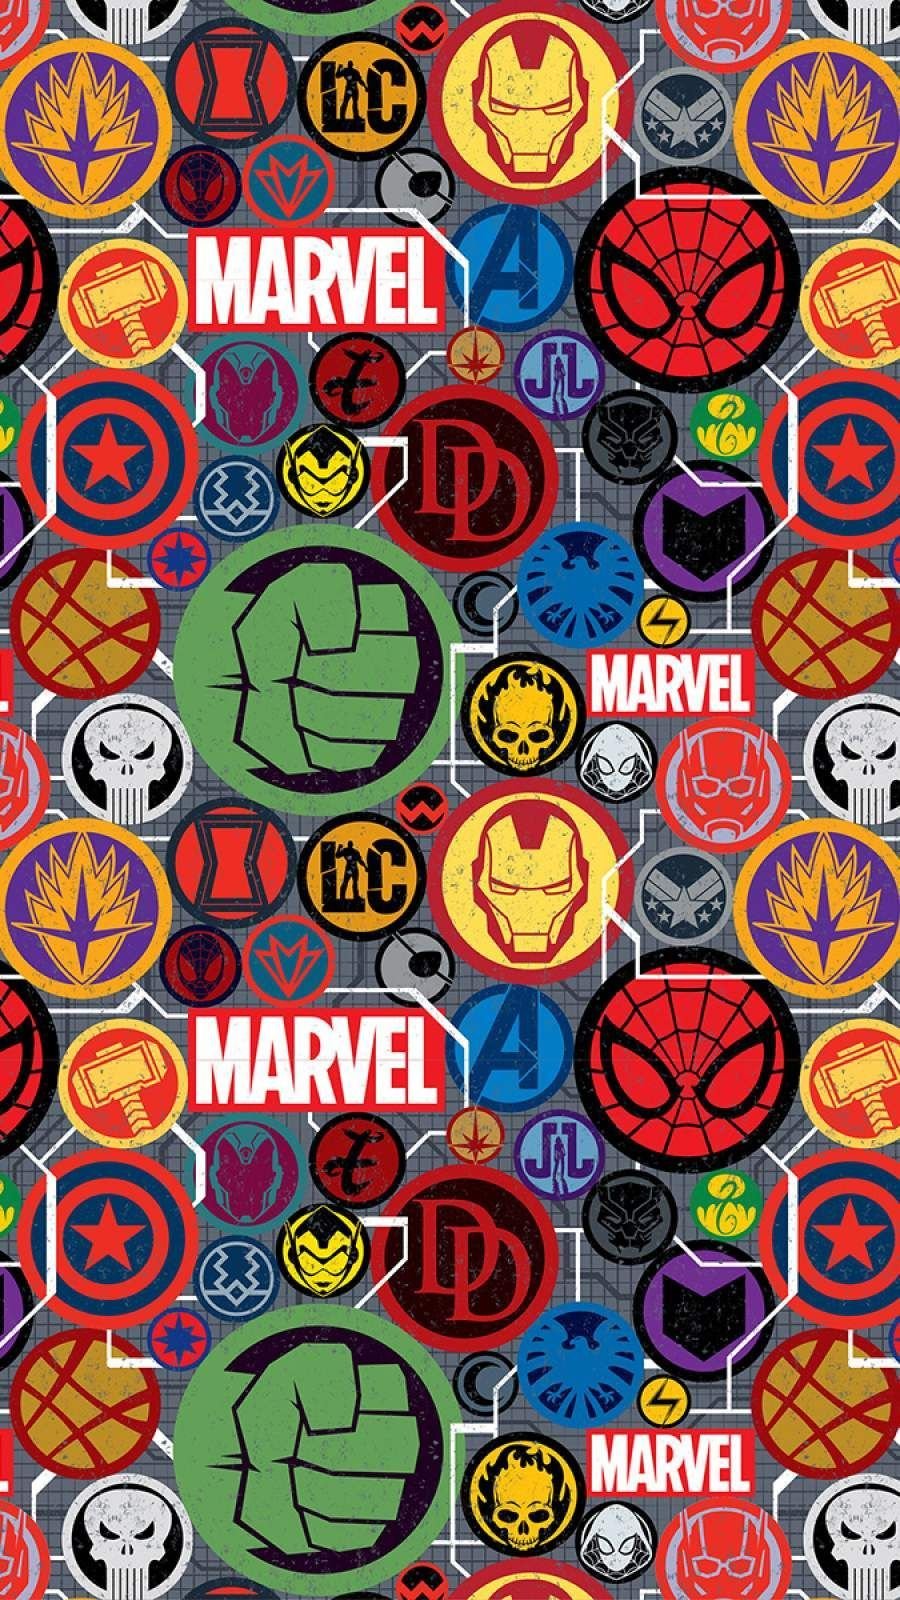 Marvel avengers logo Wallpapers Download | MobCup